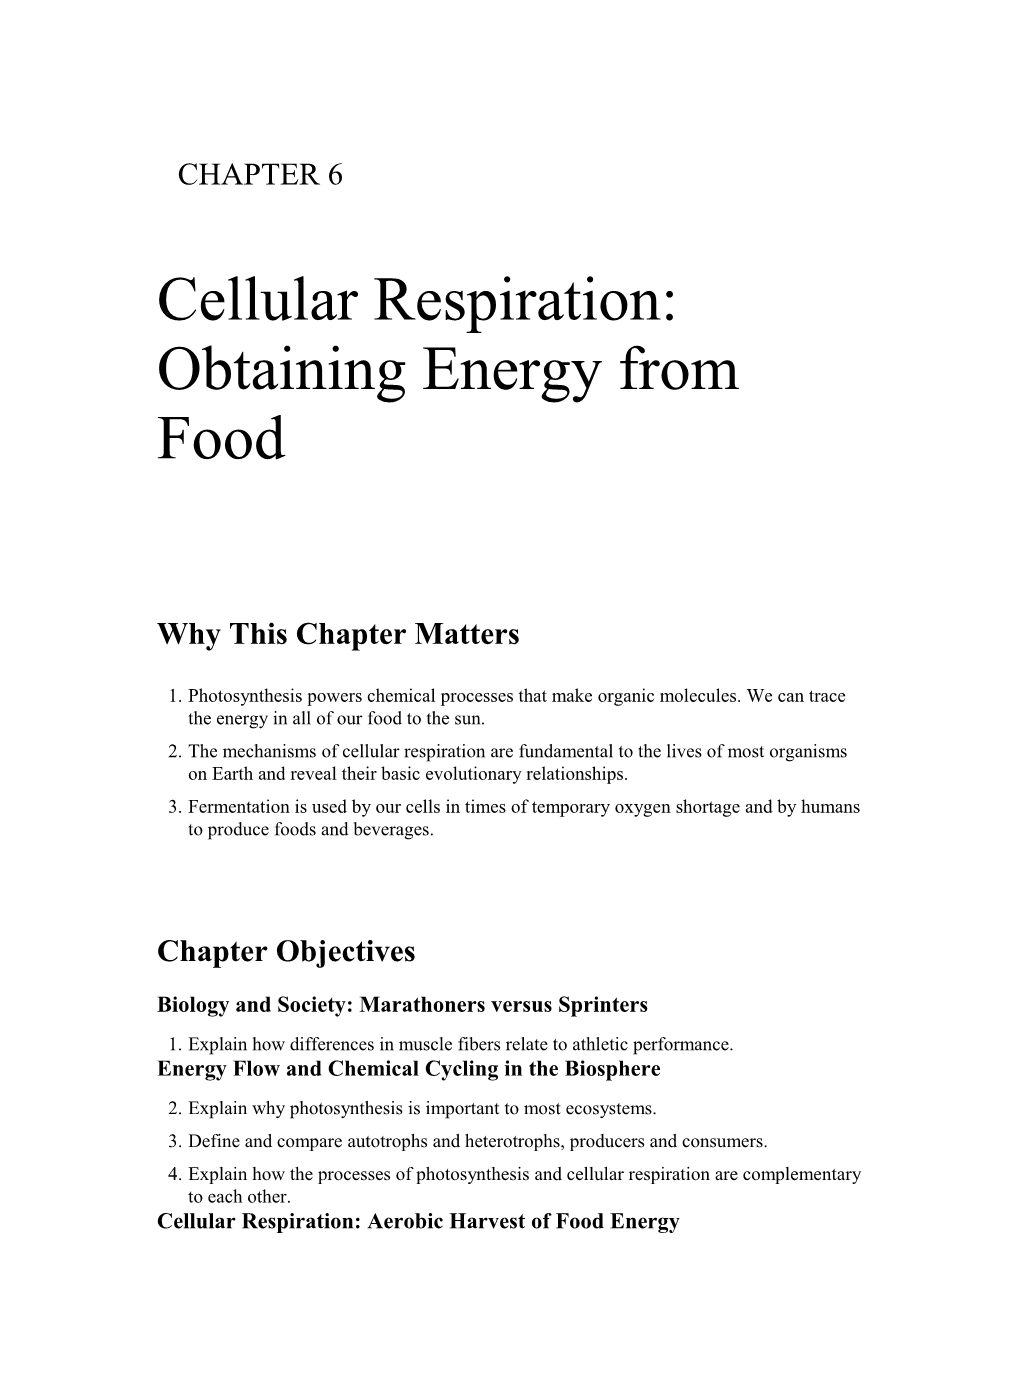 Cellular Respiration: Obtaining Energy from Food